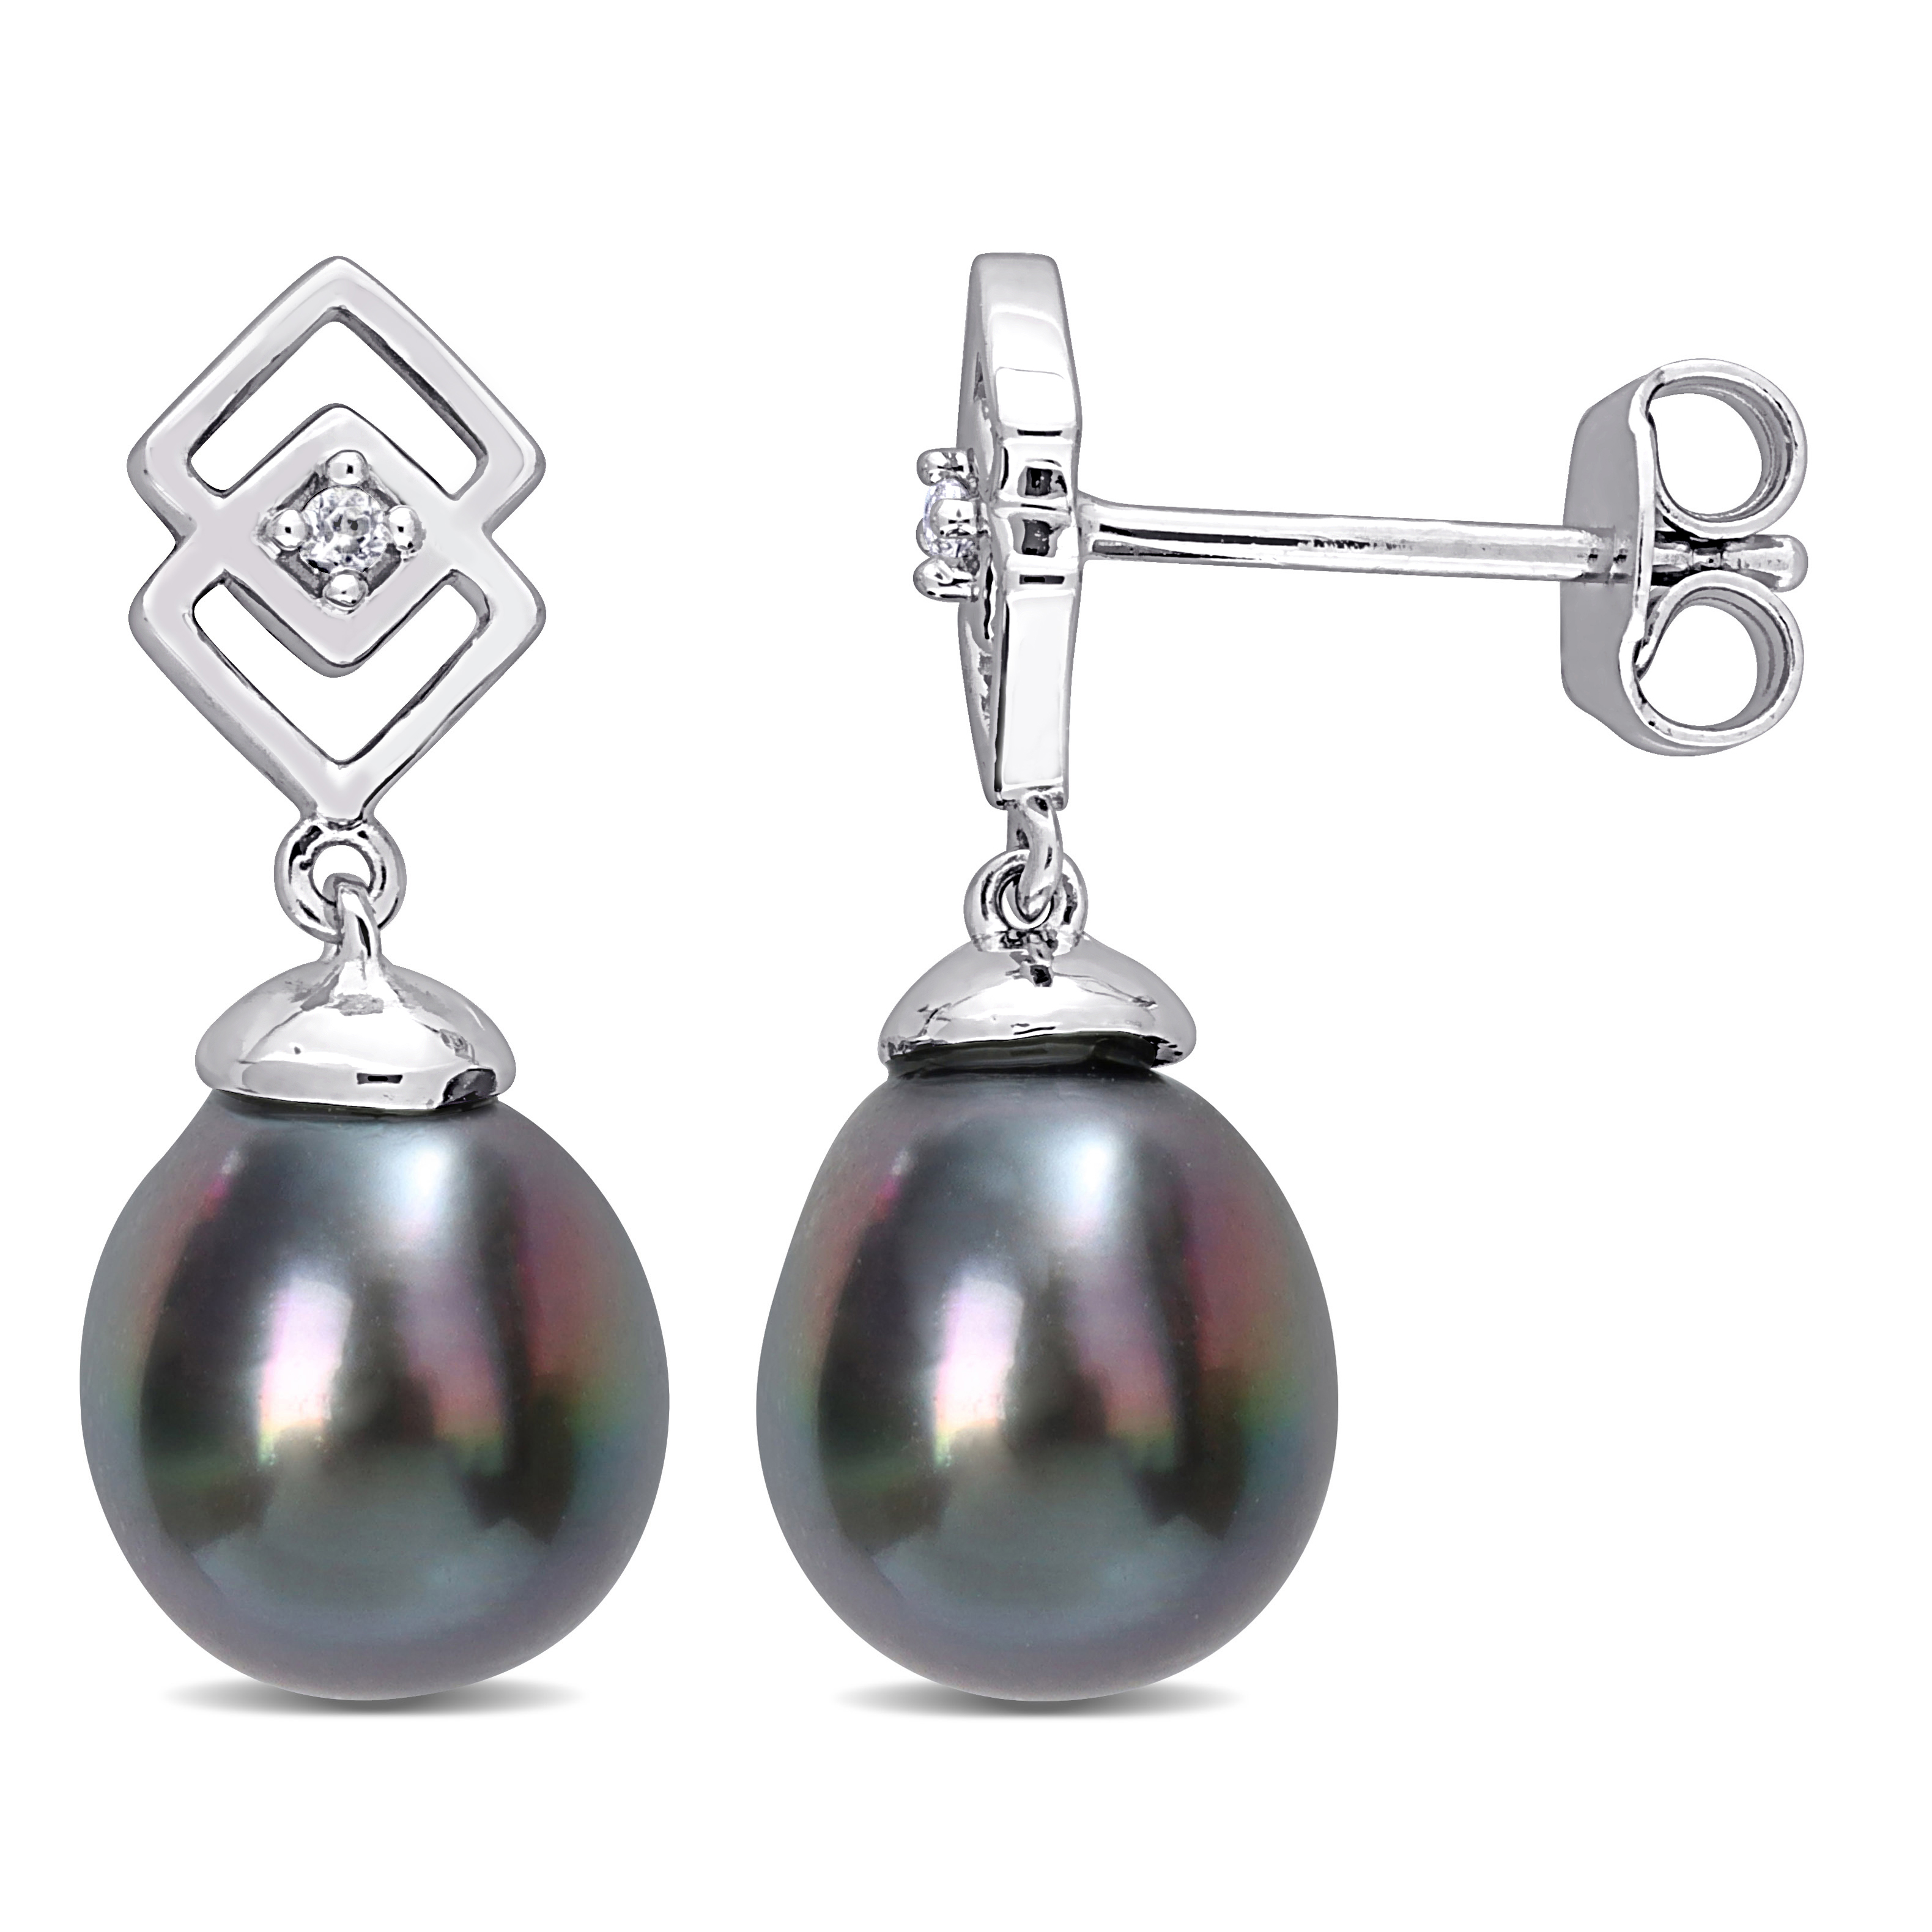 8-9 MM Black Tahitian Cultured Pearl and White Topaz Drop Earrings in Sterling Silver